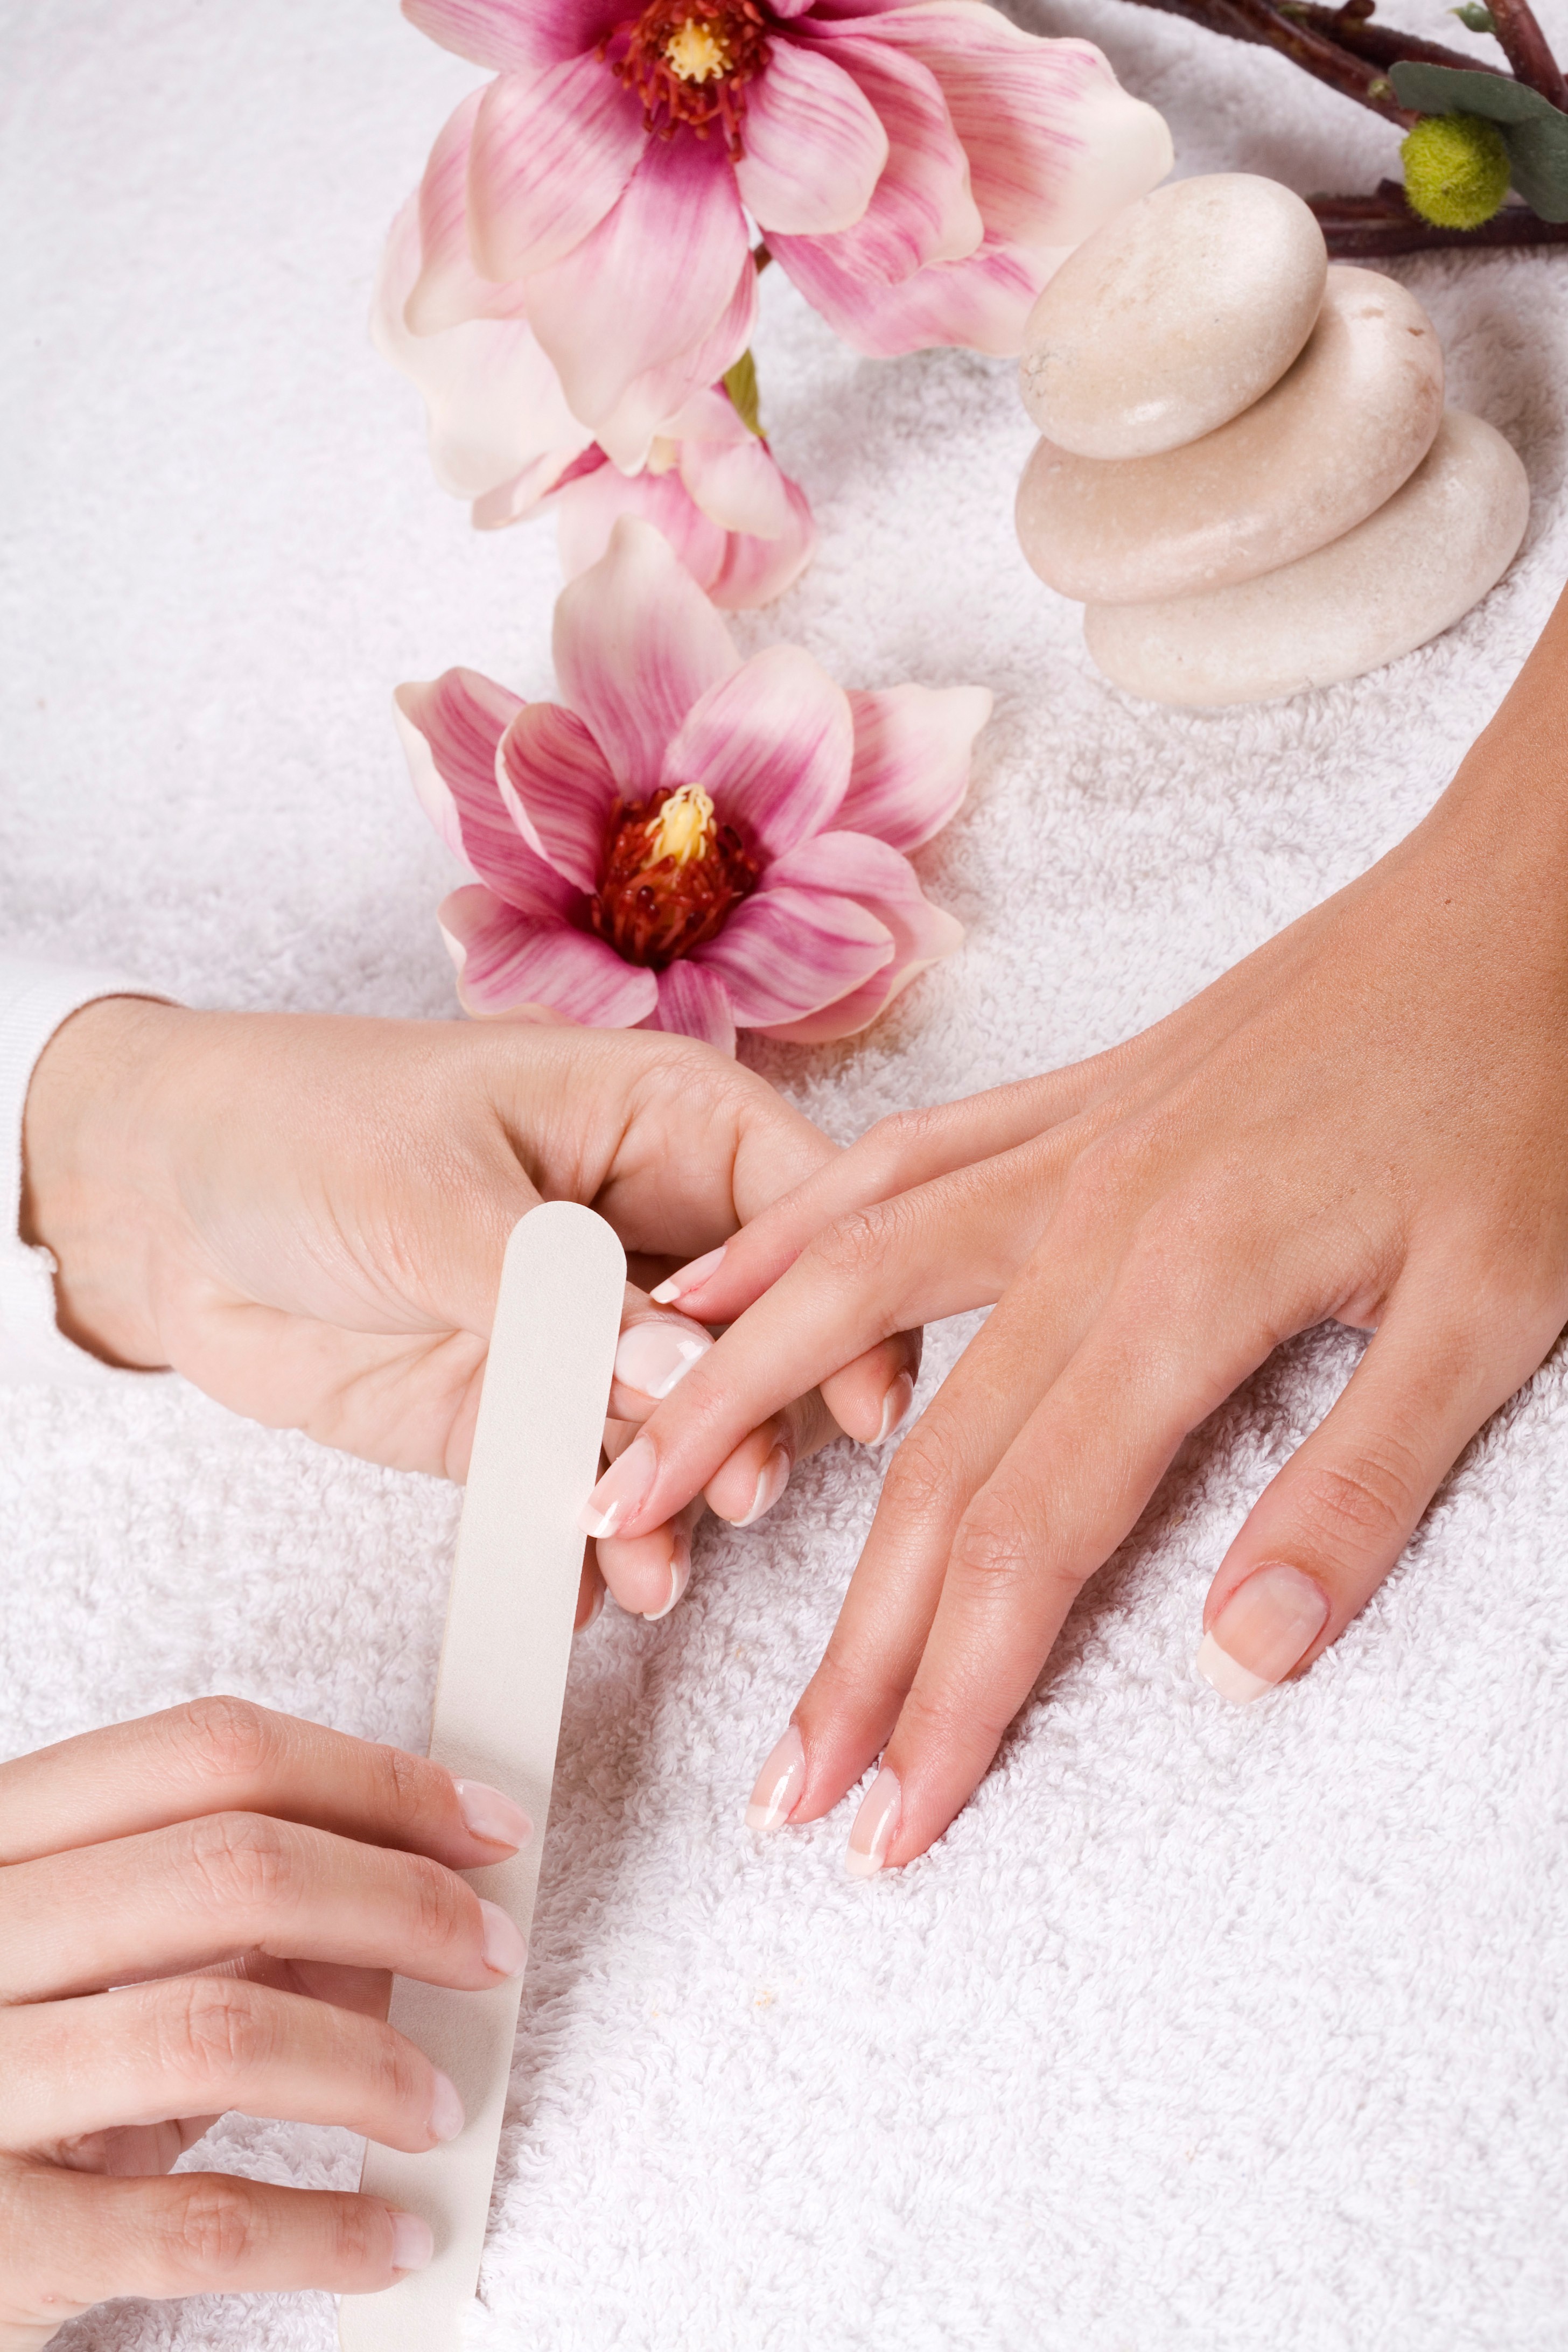 Manicure,Treatment,At,The,Wellness,Center